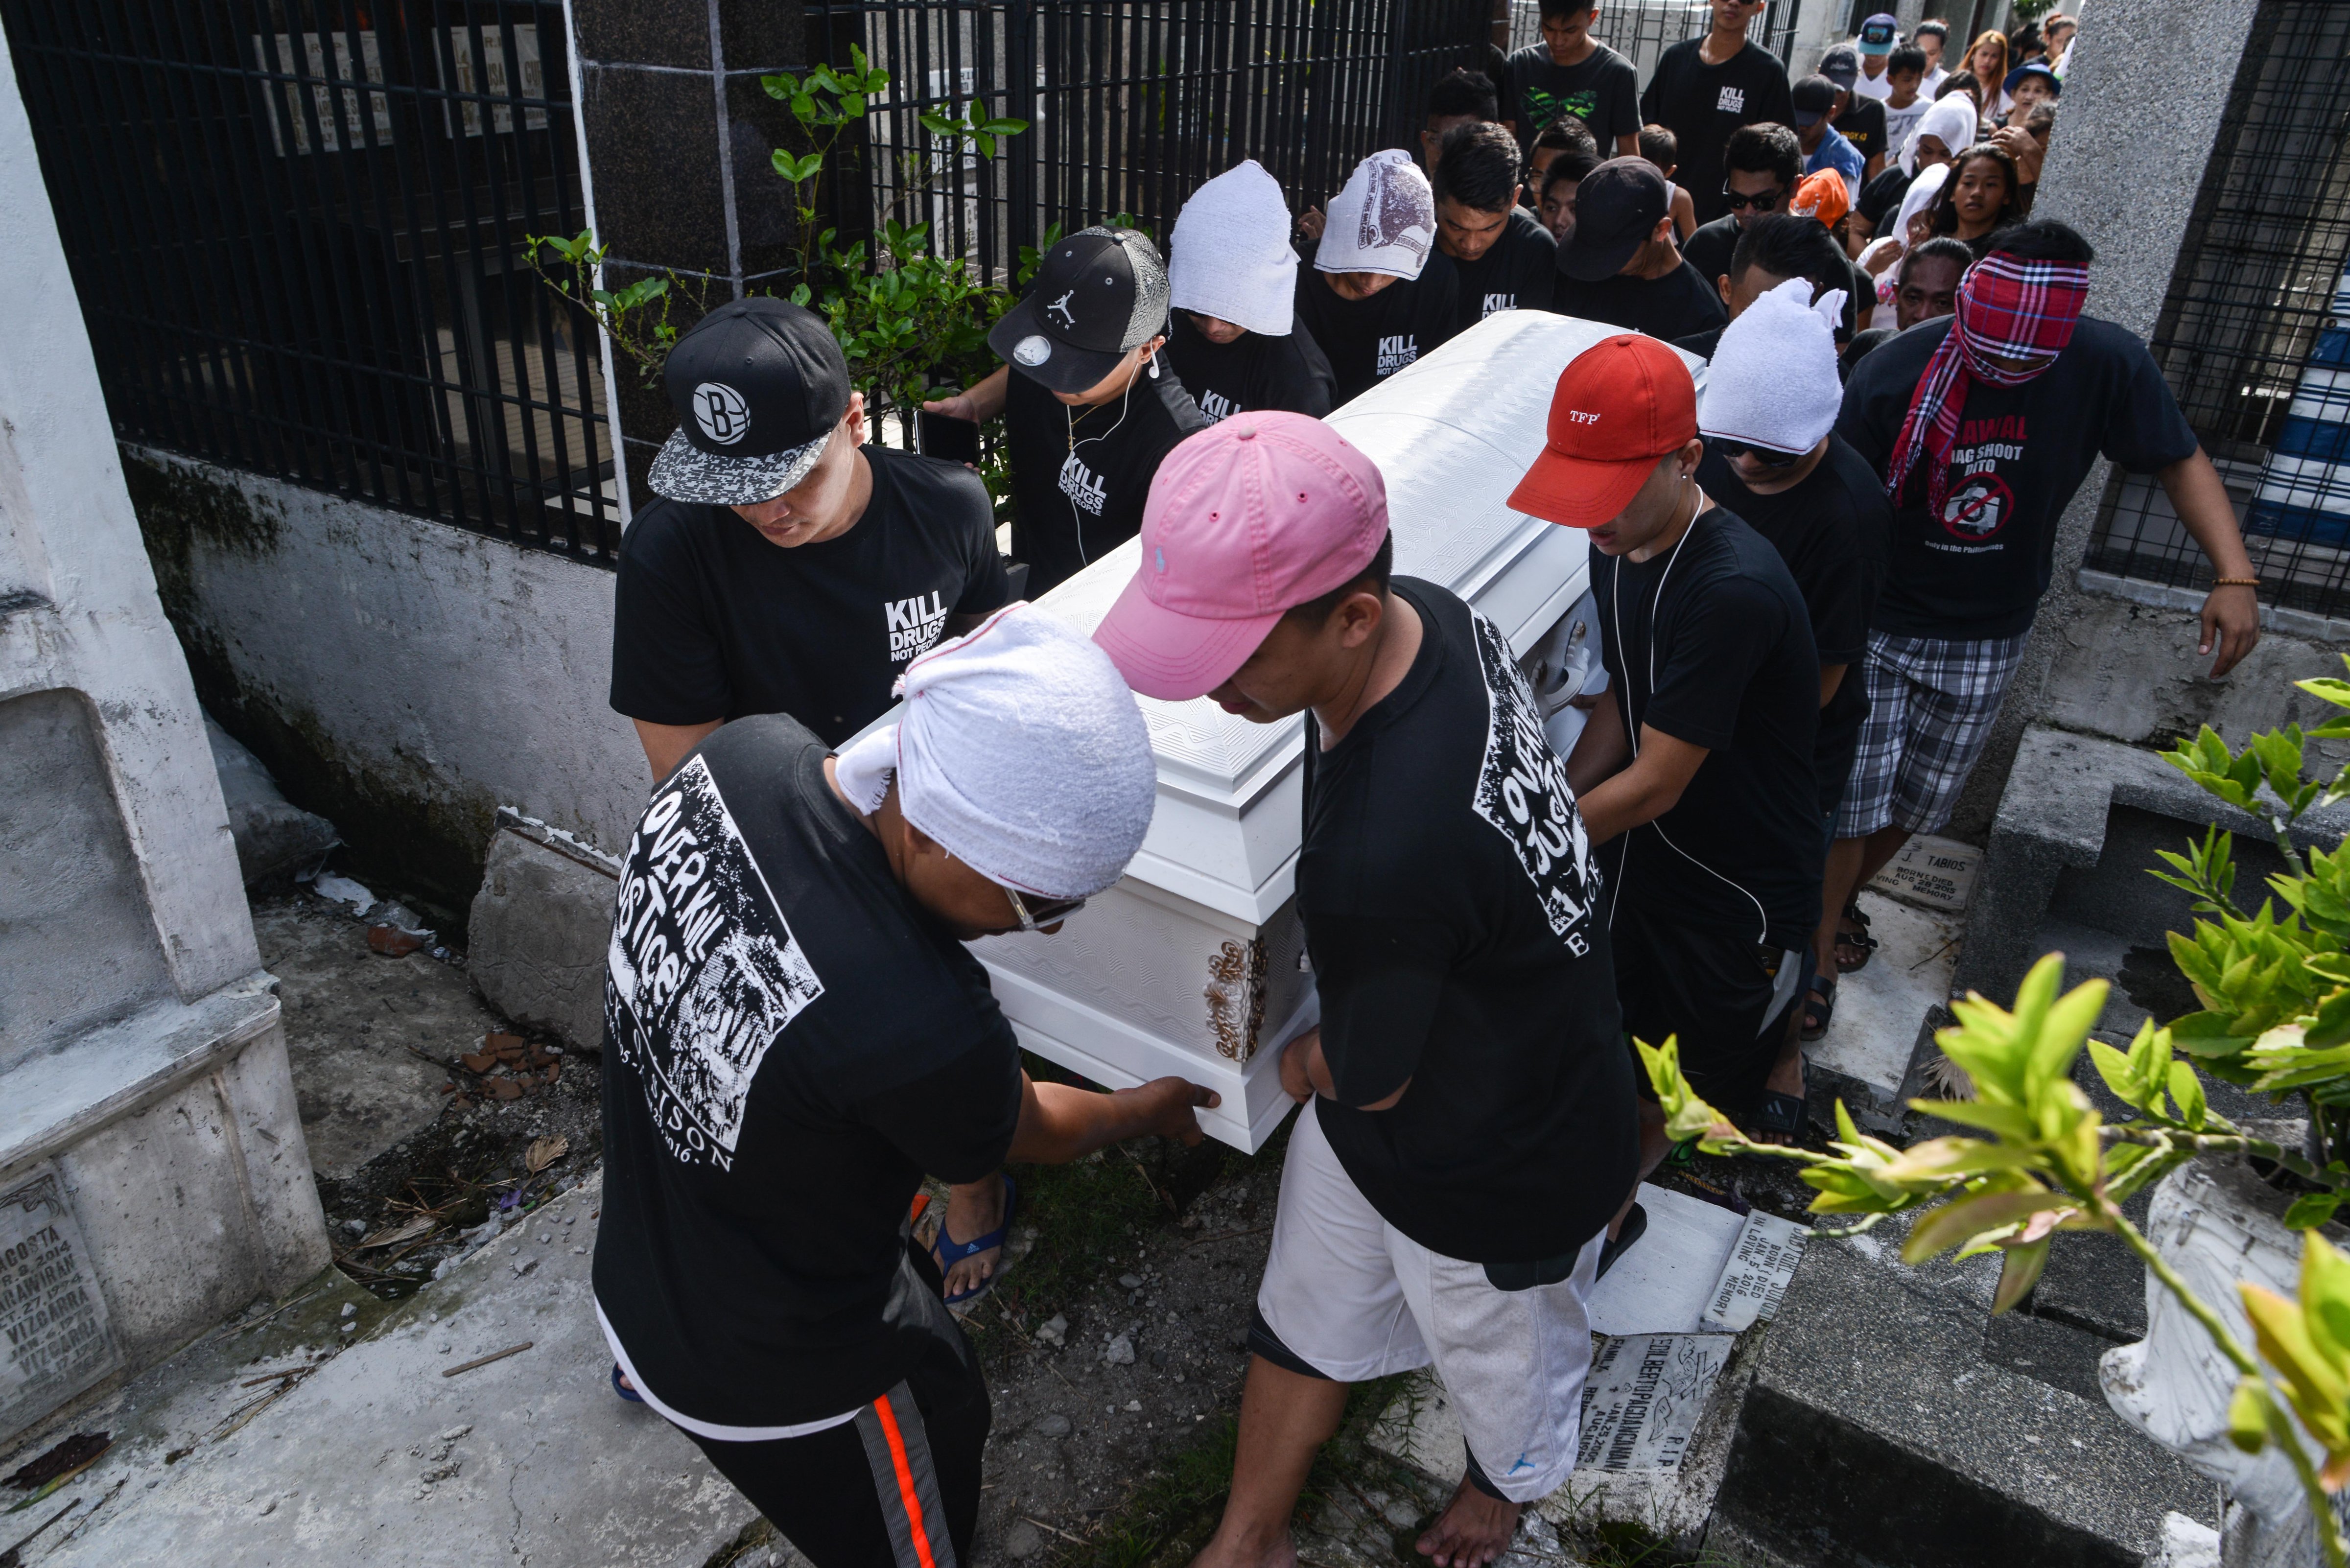 Relatives and mourners carry the coffin of a teenager killed by police as he allegedly resisted arrest during a night patrol on August 31, 2016 in Manila, Philippines. (Dondi Tawatao—Getty Images)